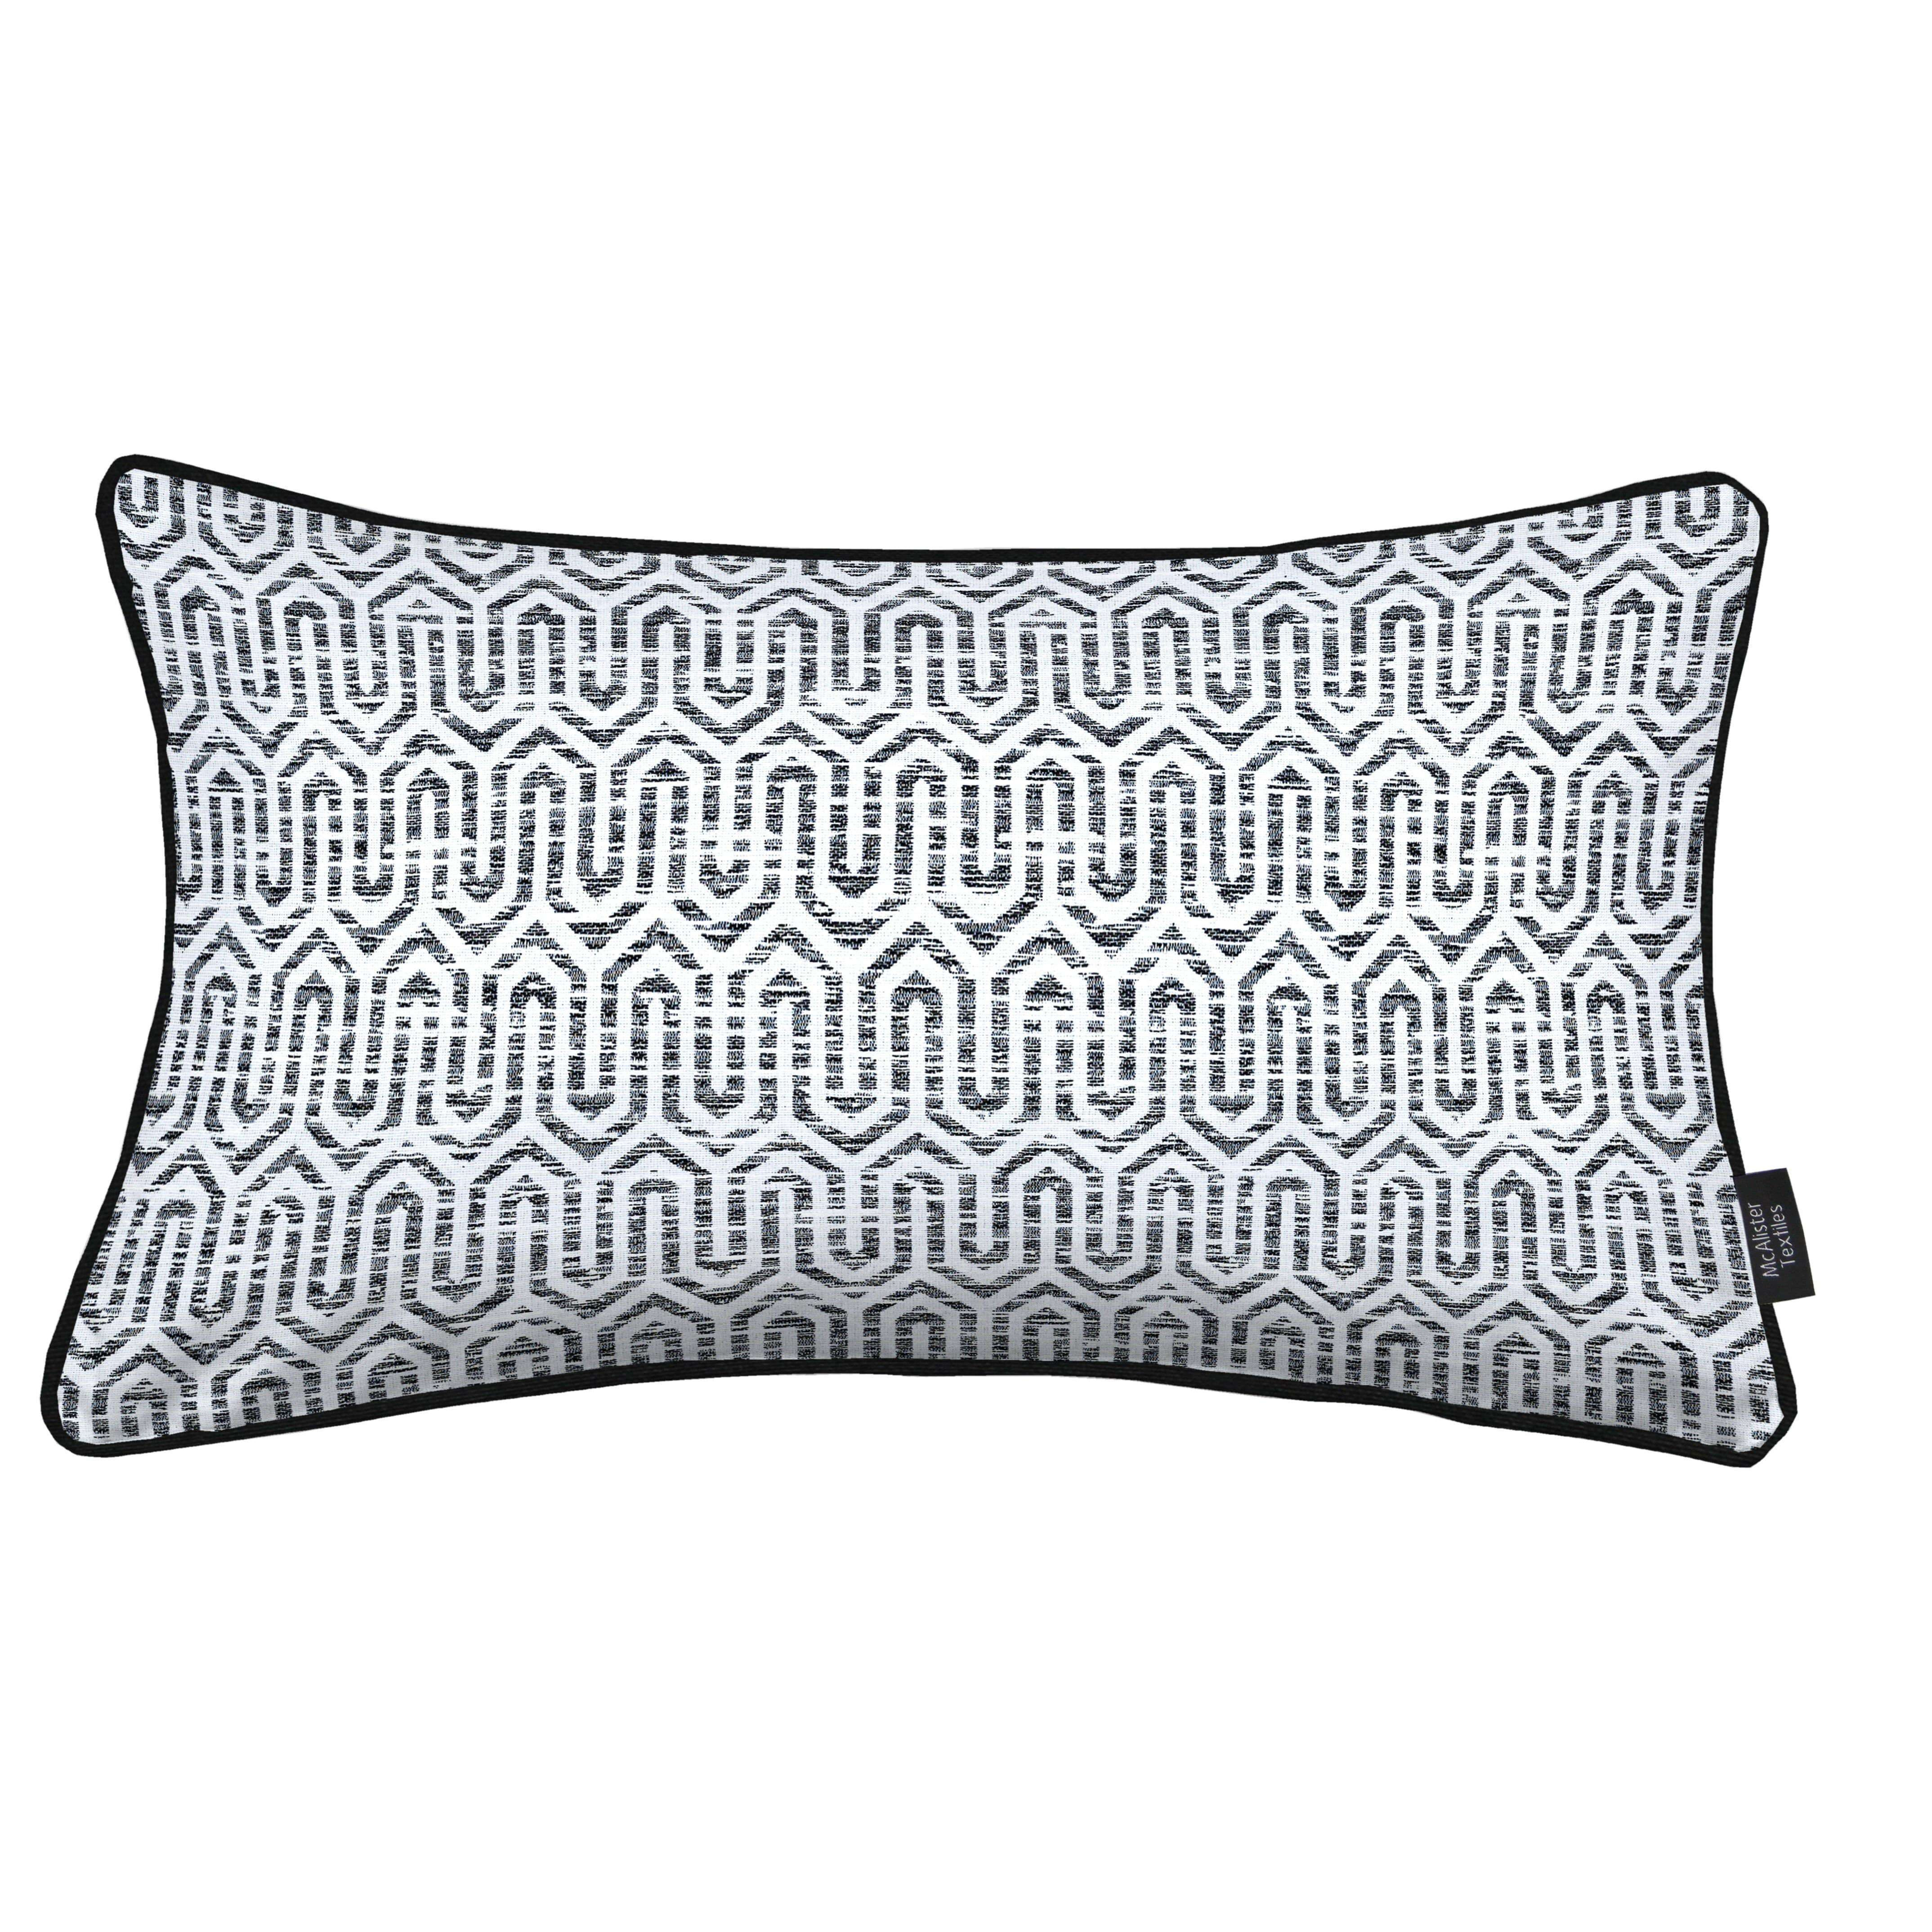 Costa Rica Black + White Abstract Pillow, Cover Only / 60cm x 40cm / Black piping